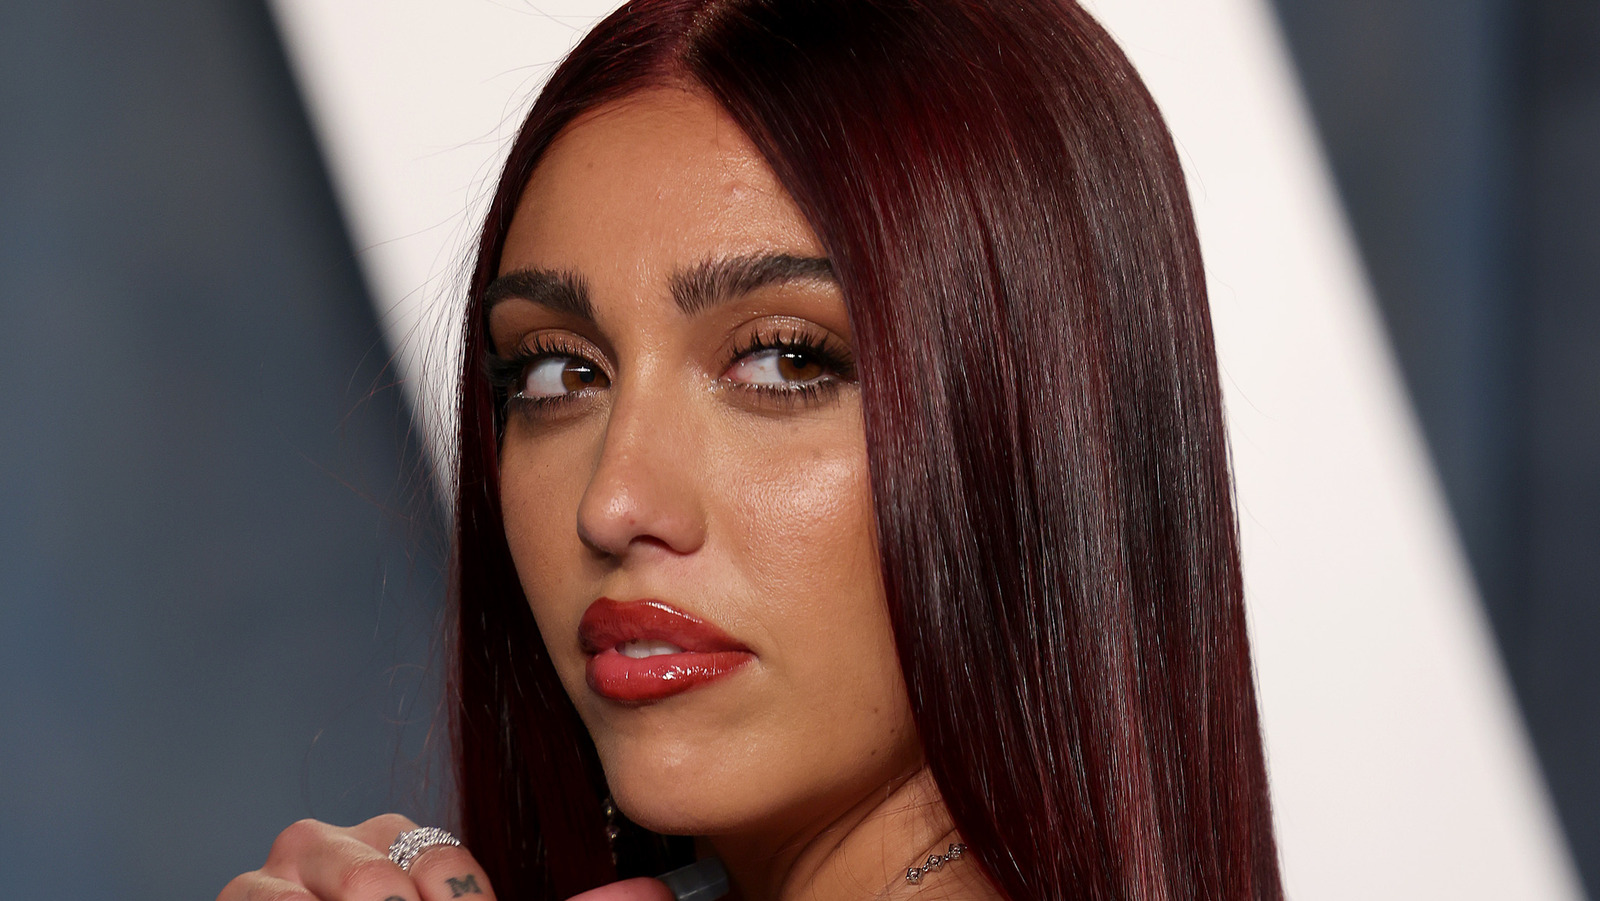 Madonna's daughter Lourdes Leon says Met Gala is 'not my vibe